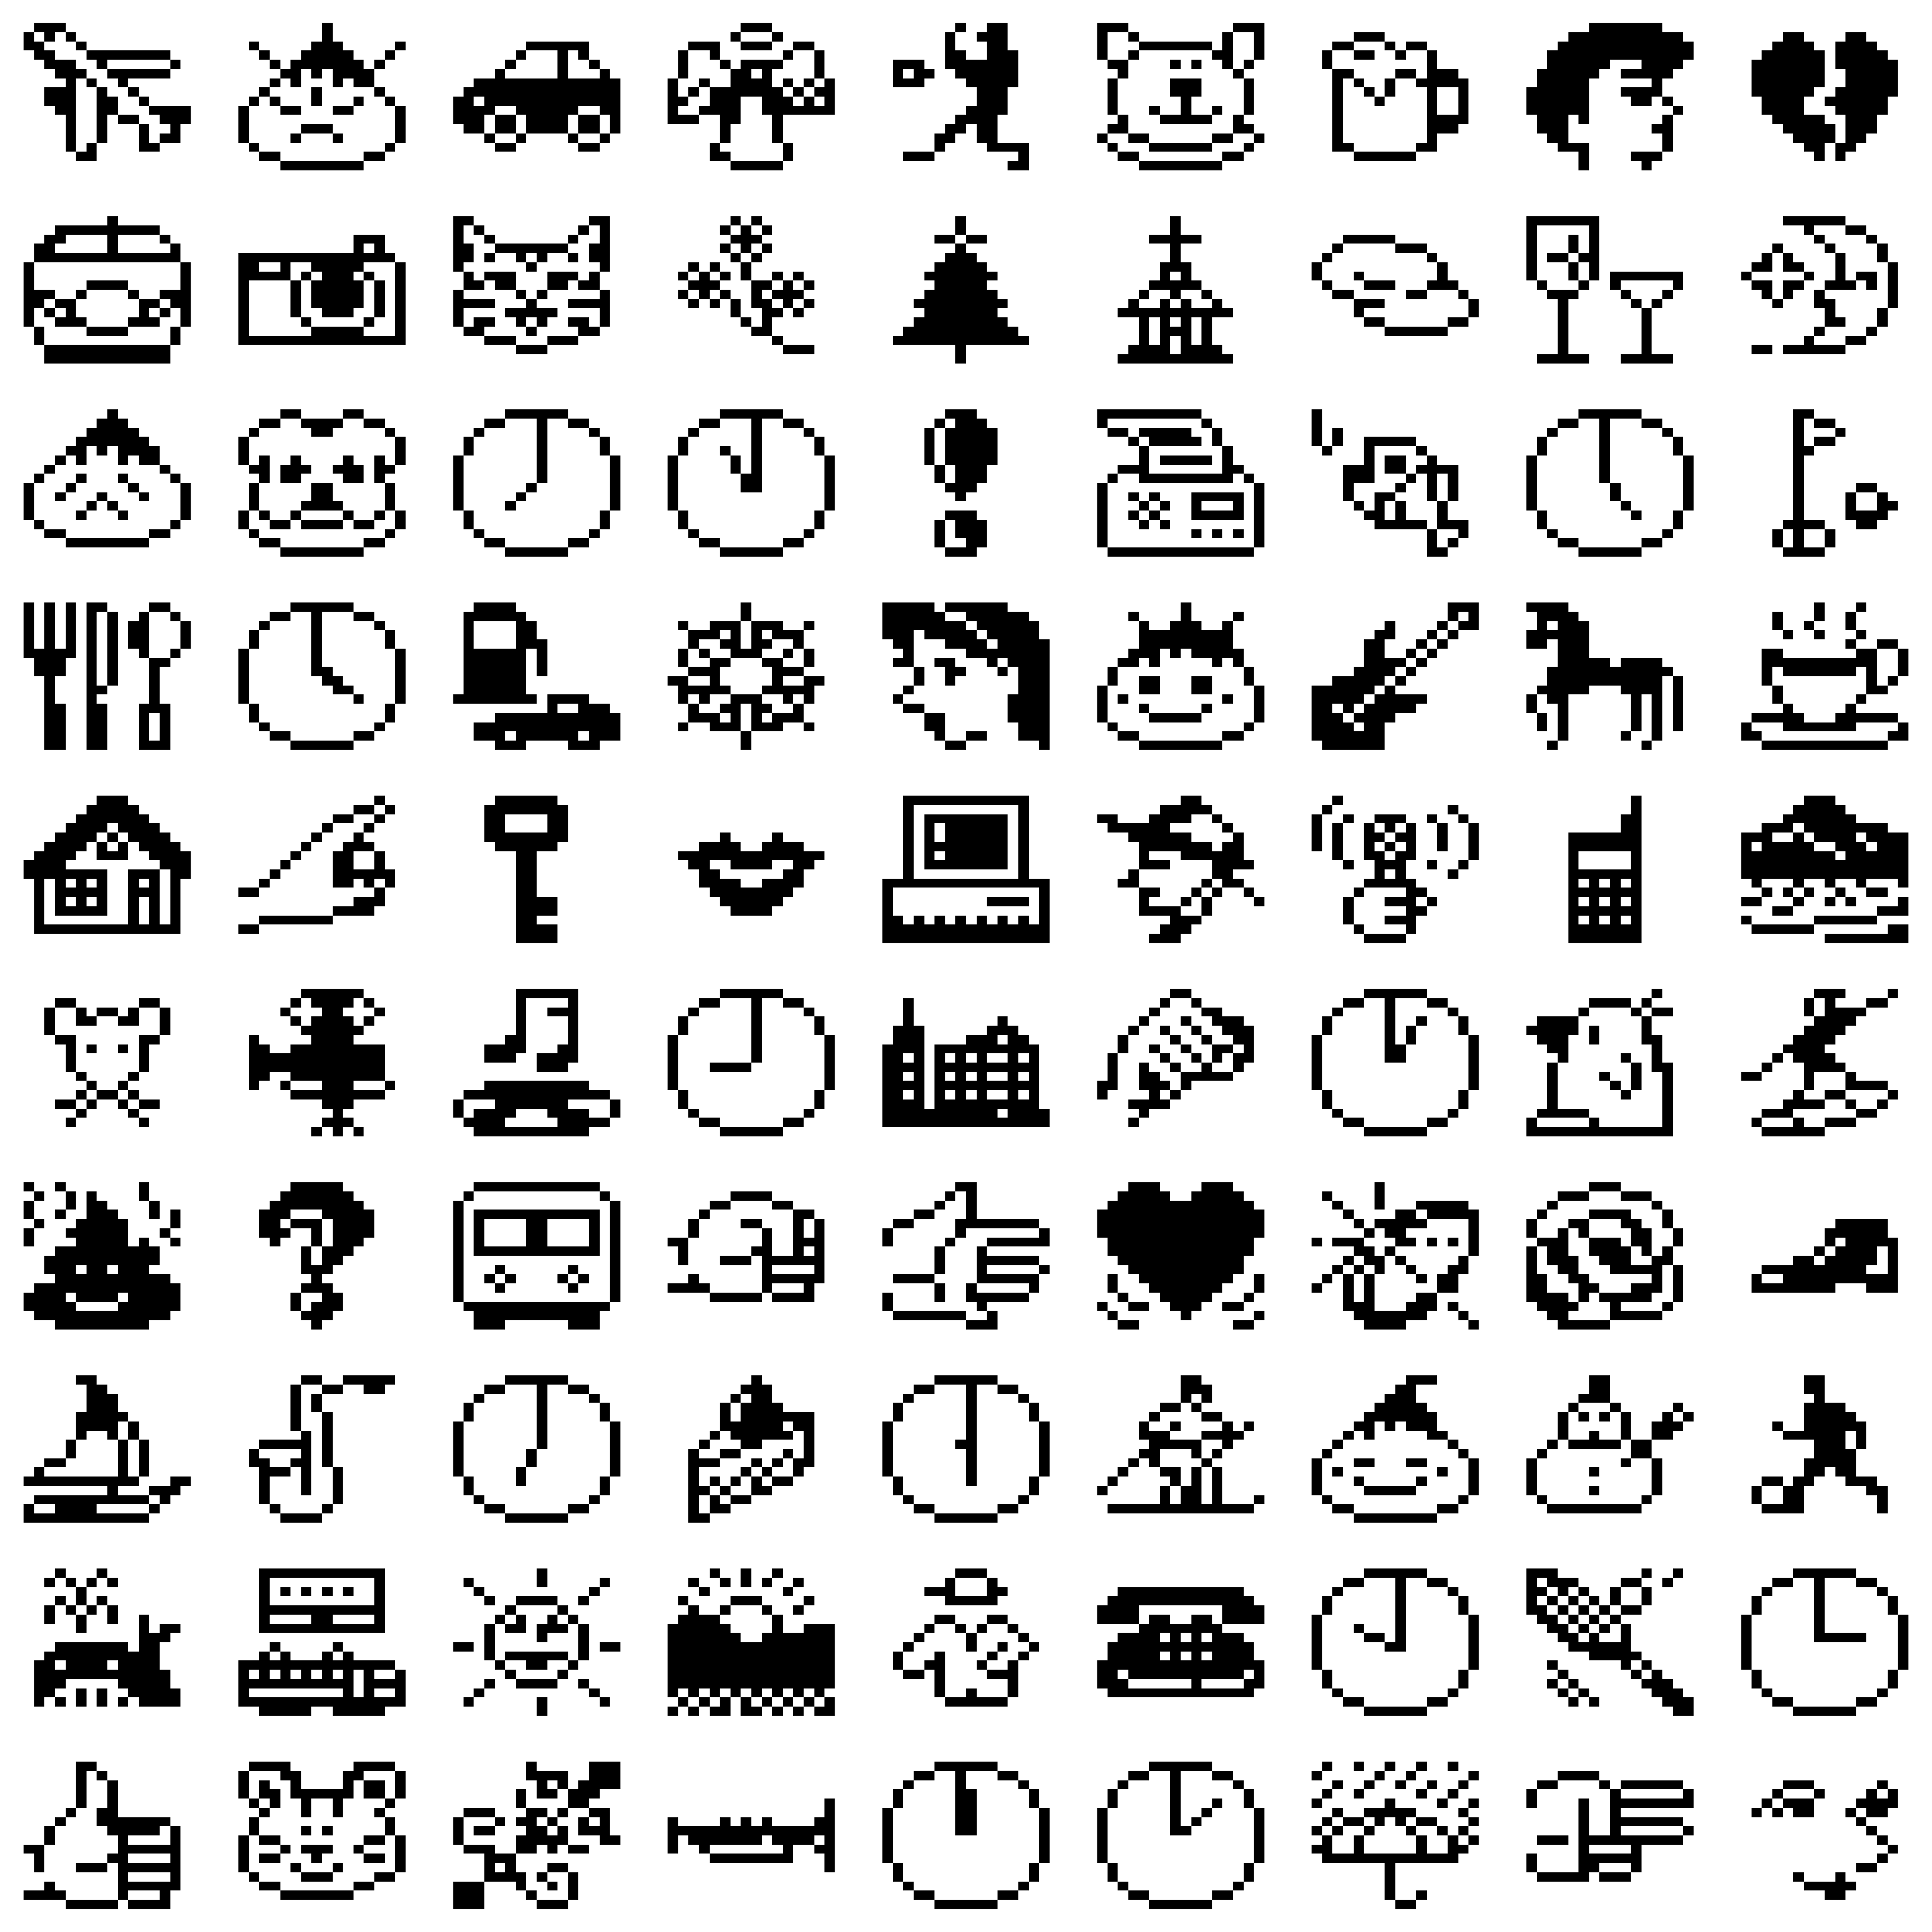 A 10 by 9 grid of black-and-white pixelated emoji from the original 1997 SoftBank set.